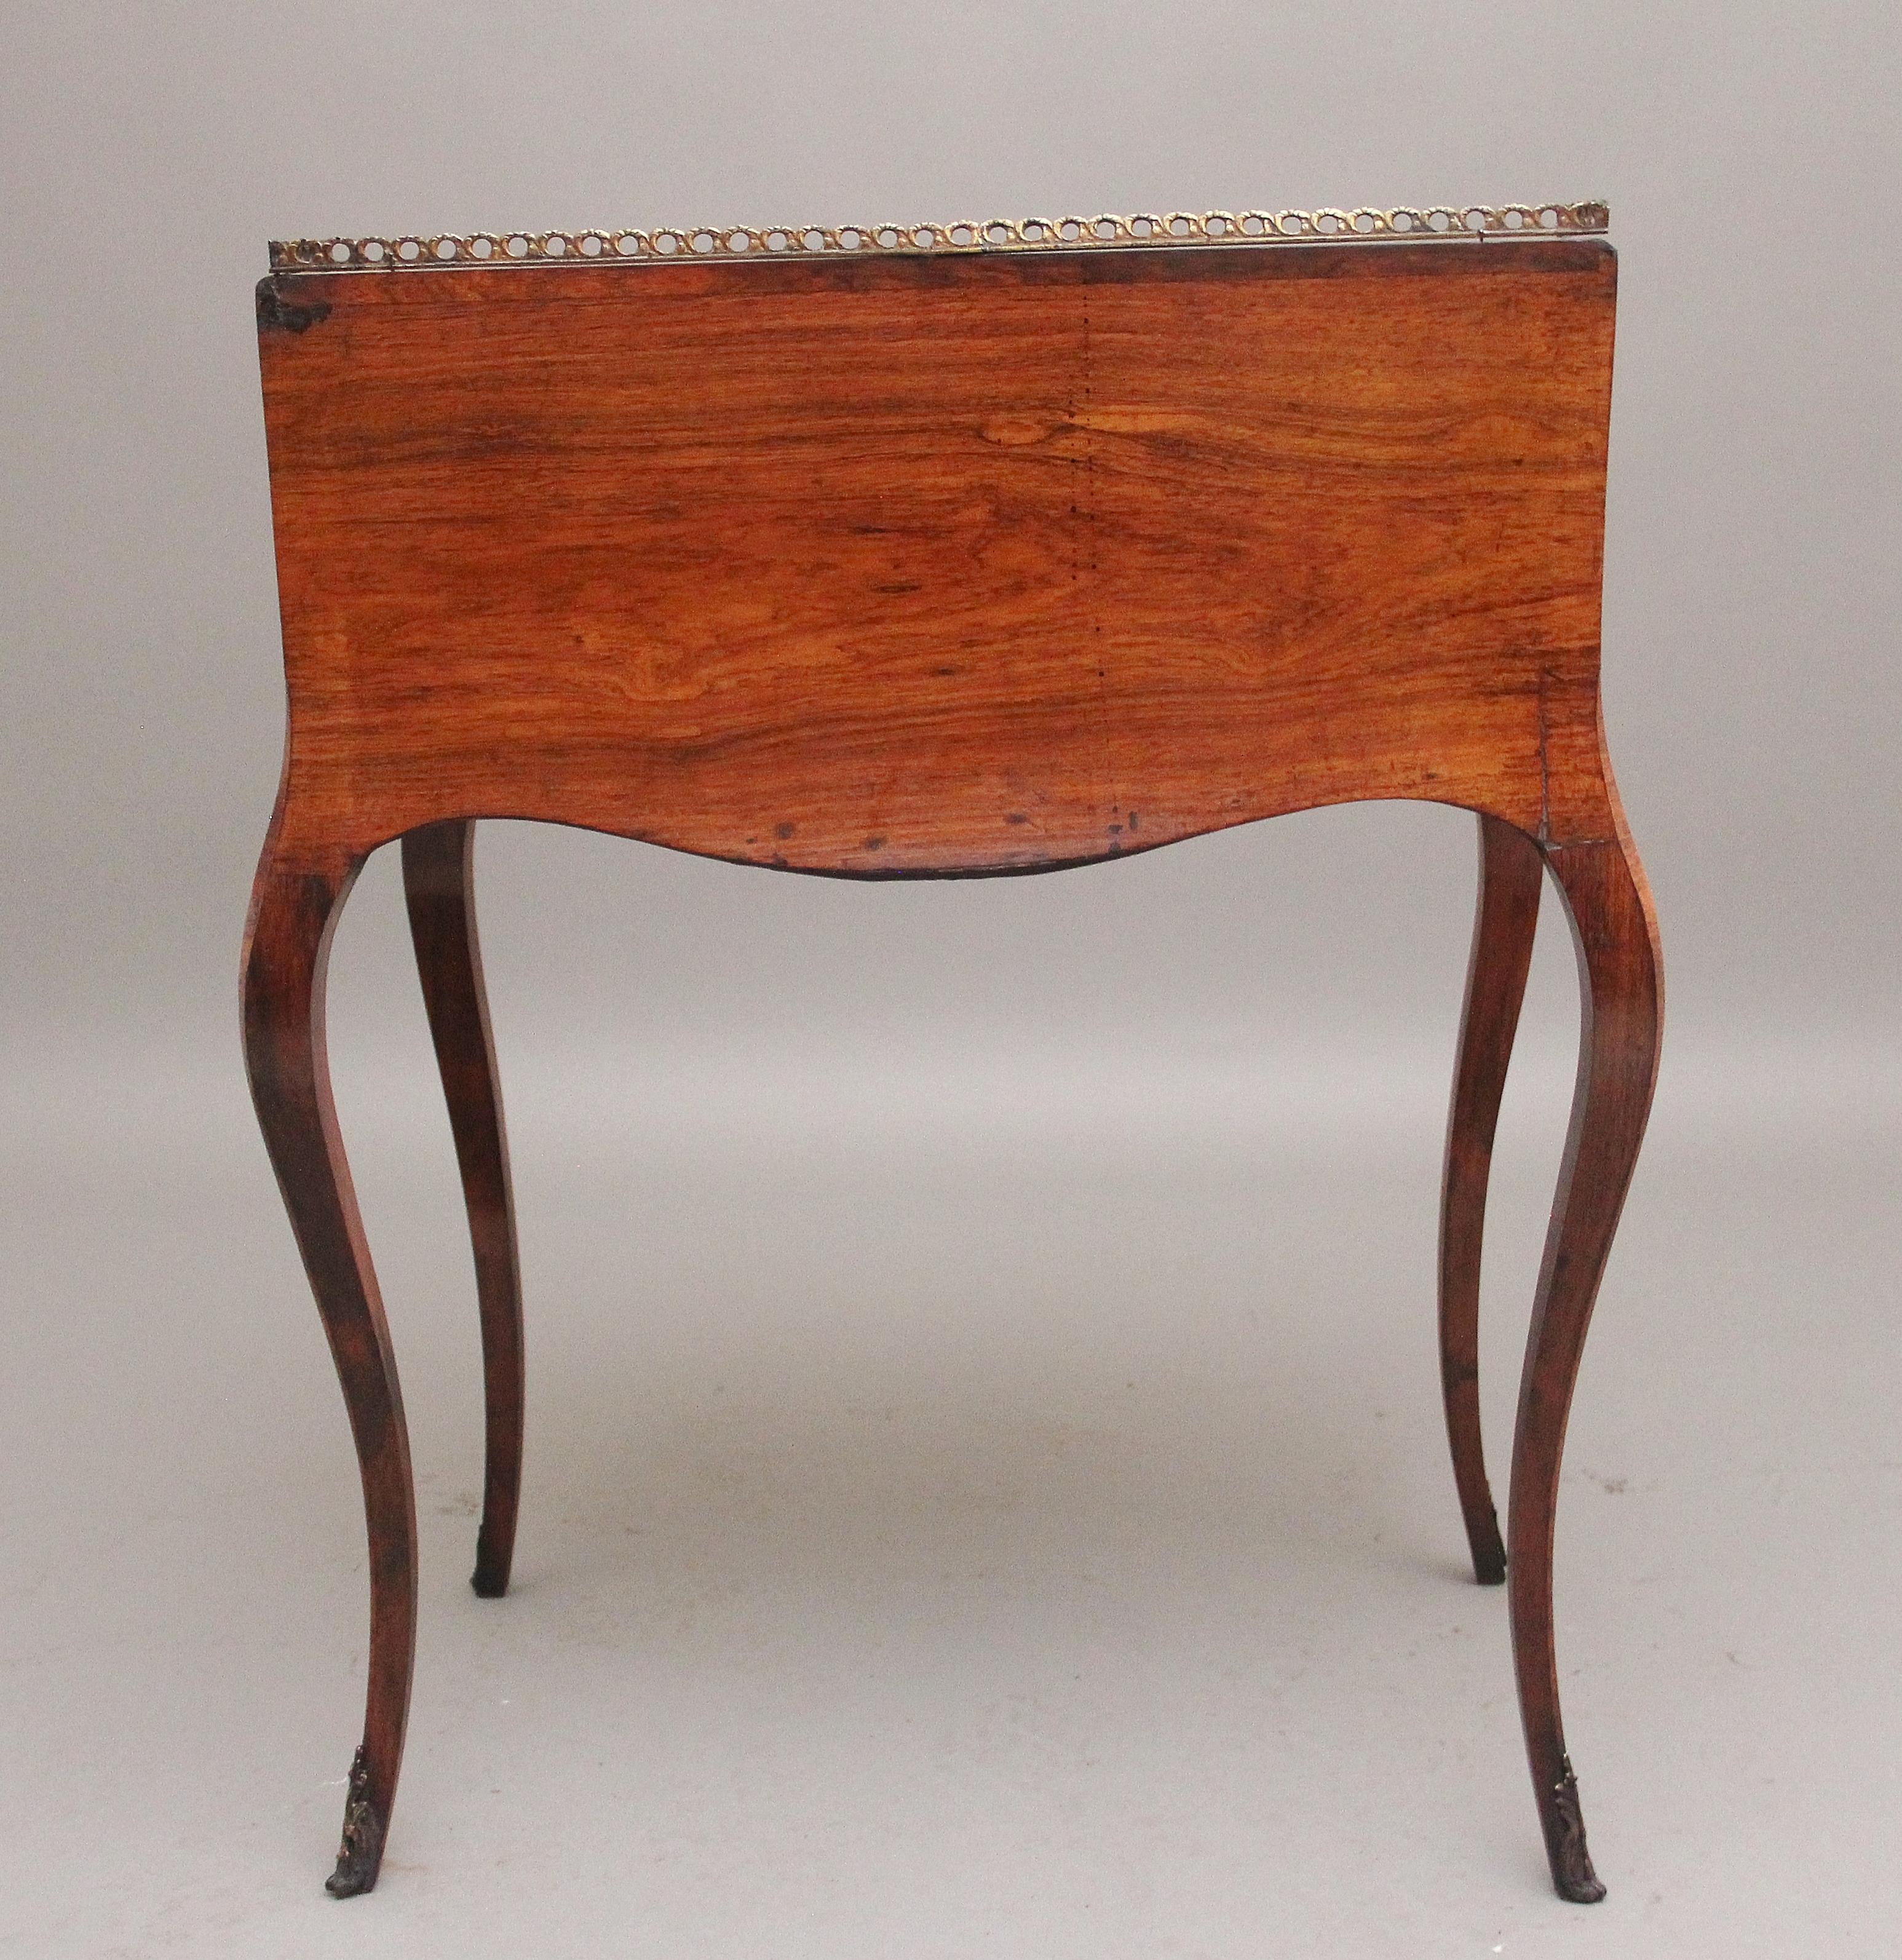 Superb Quality Freestanding 19th Century Kingwood and Marquetry Inlaid Bureau For Sale 5